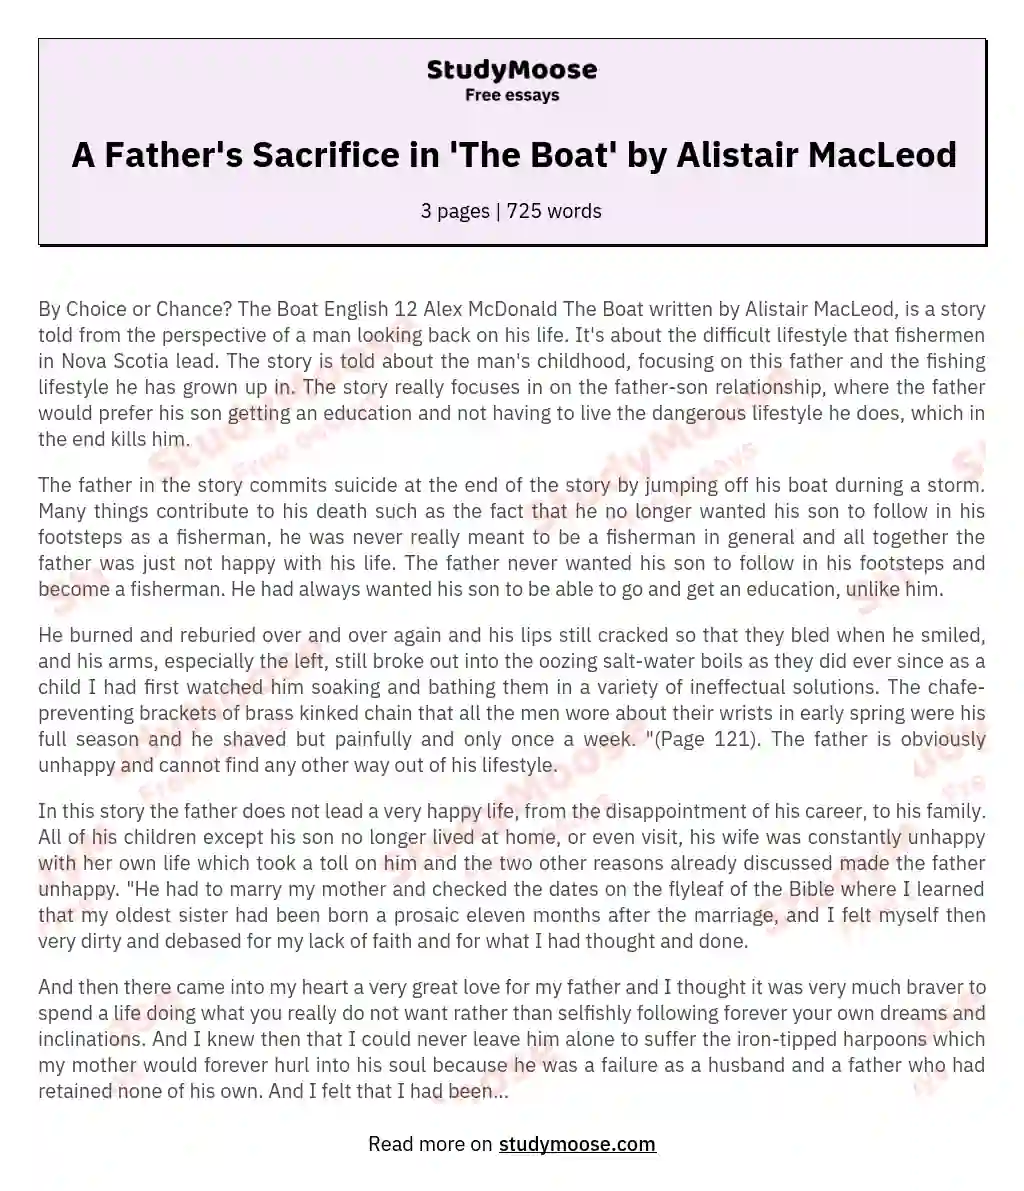 A Father's Sacrifice in 'The Boat' by Alistair MacLeod essay